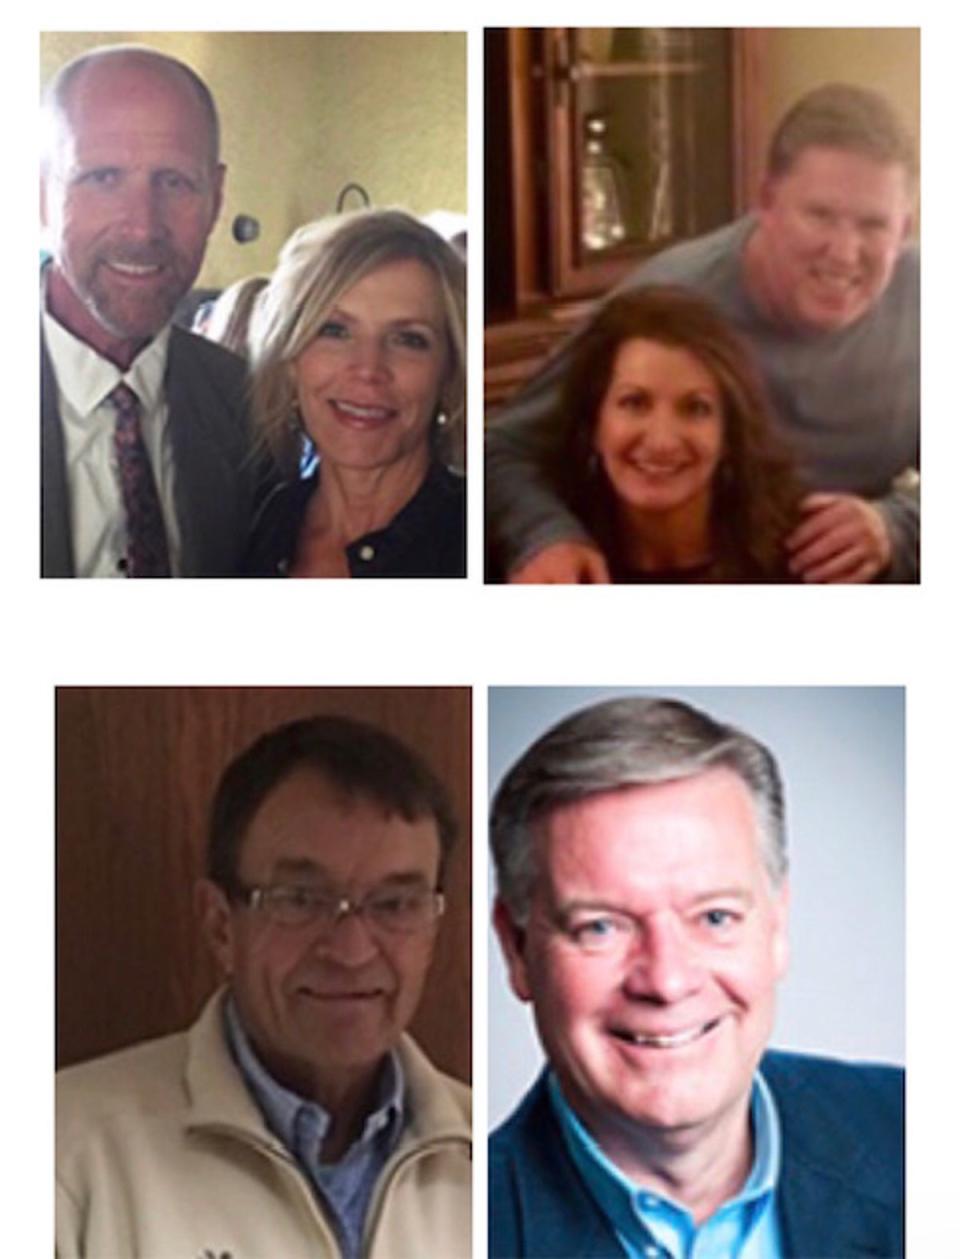 The late JonBenét Ramsey investigator Lou Smit’s family members, top, and former fellow lawmen Dave Spencer (who passed away in 2020), bottom left, and  John Wesley Anderson, bottom right, took on the investigation after his 2010 death (GoFundMe)